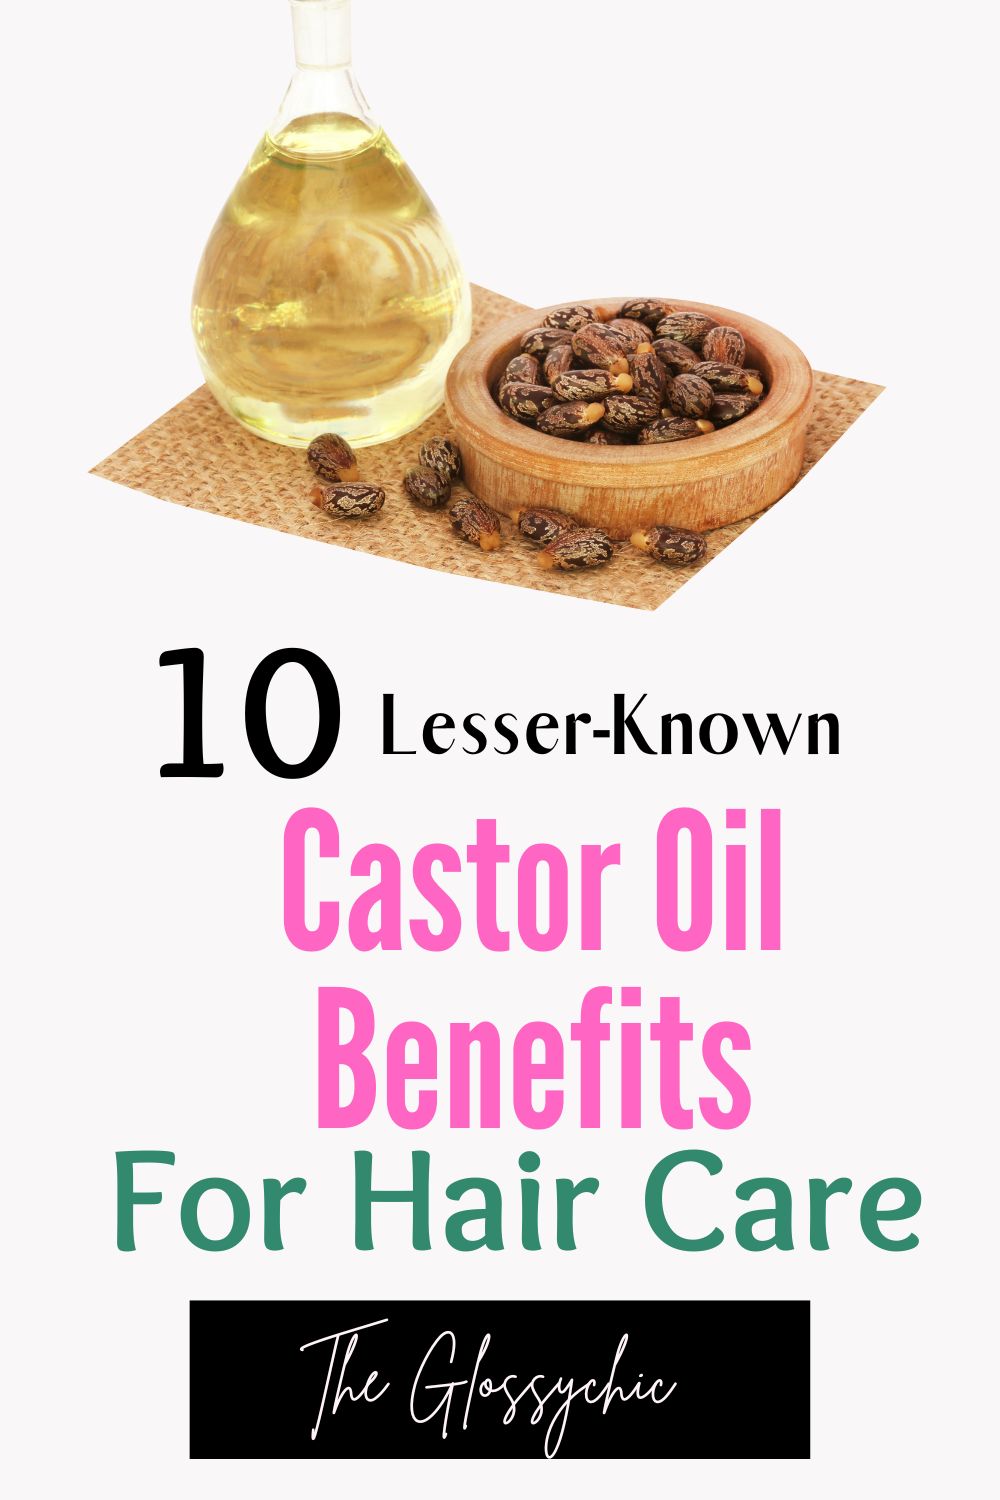 10 Lesser-Known Castor Oil Benefits For Hair Care